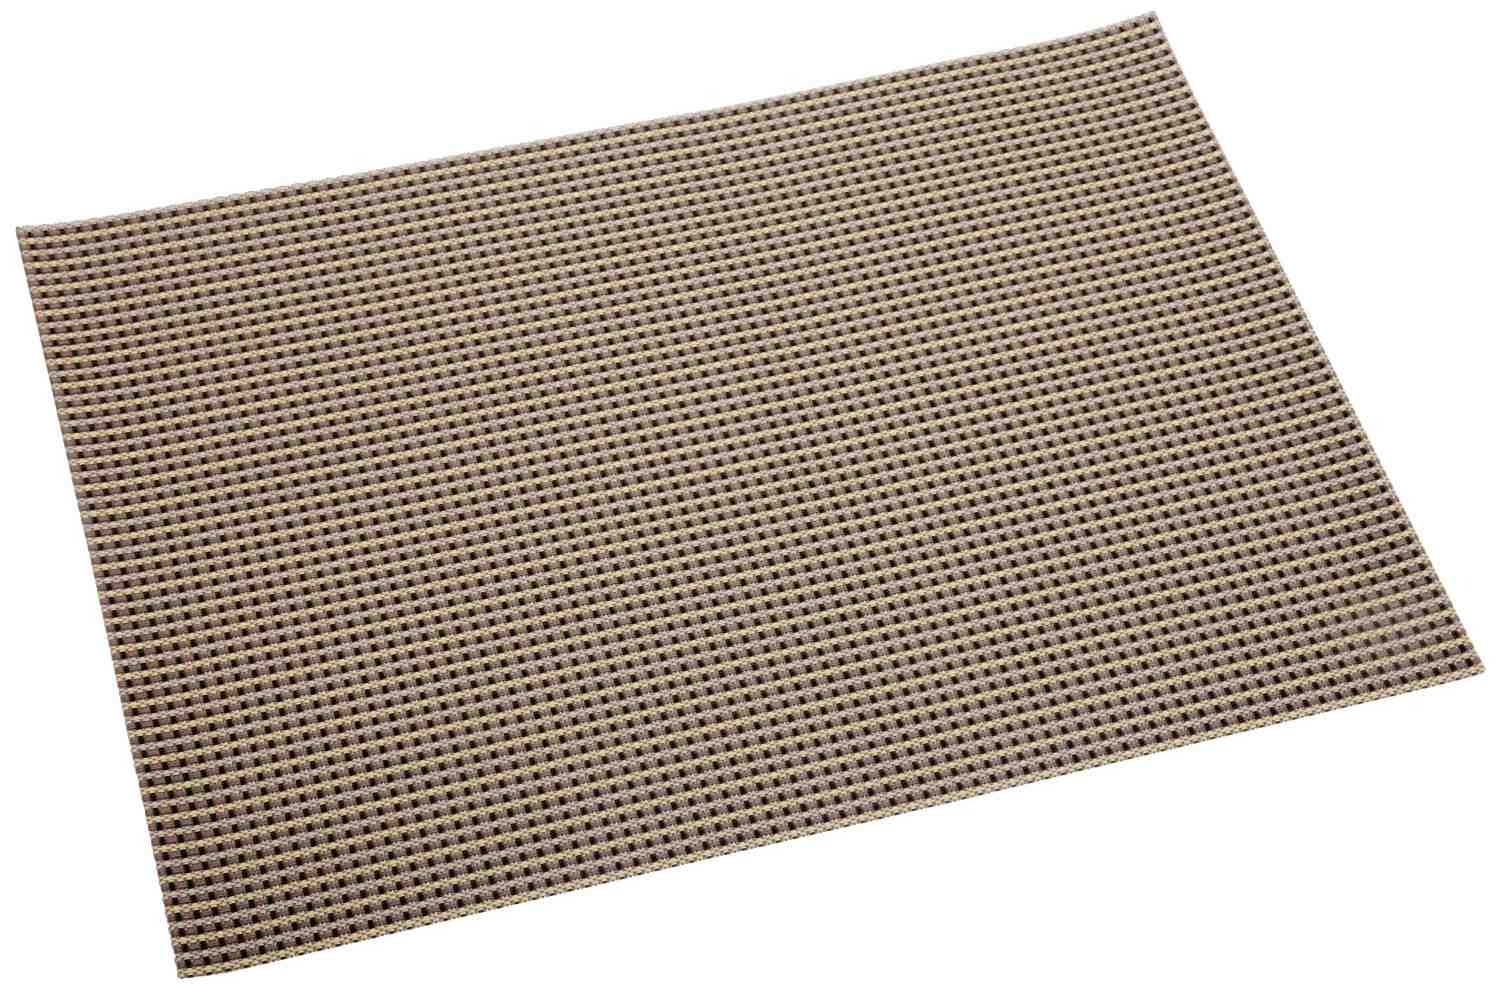 TATEhome Polyvinyl Placemat | Taupe Tweed